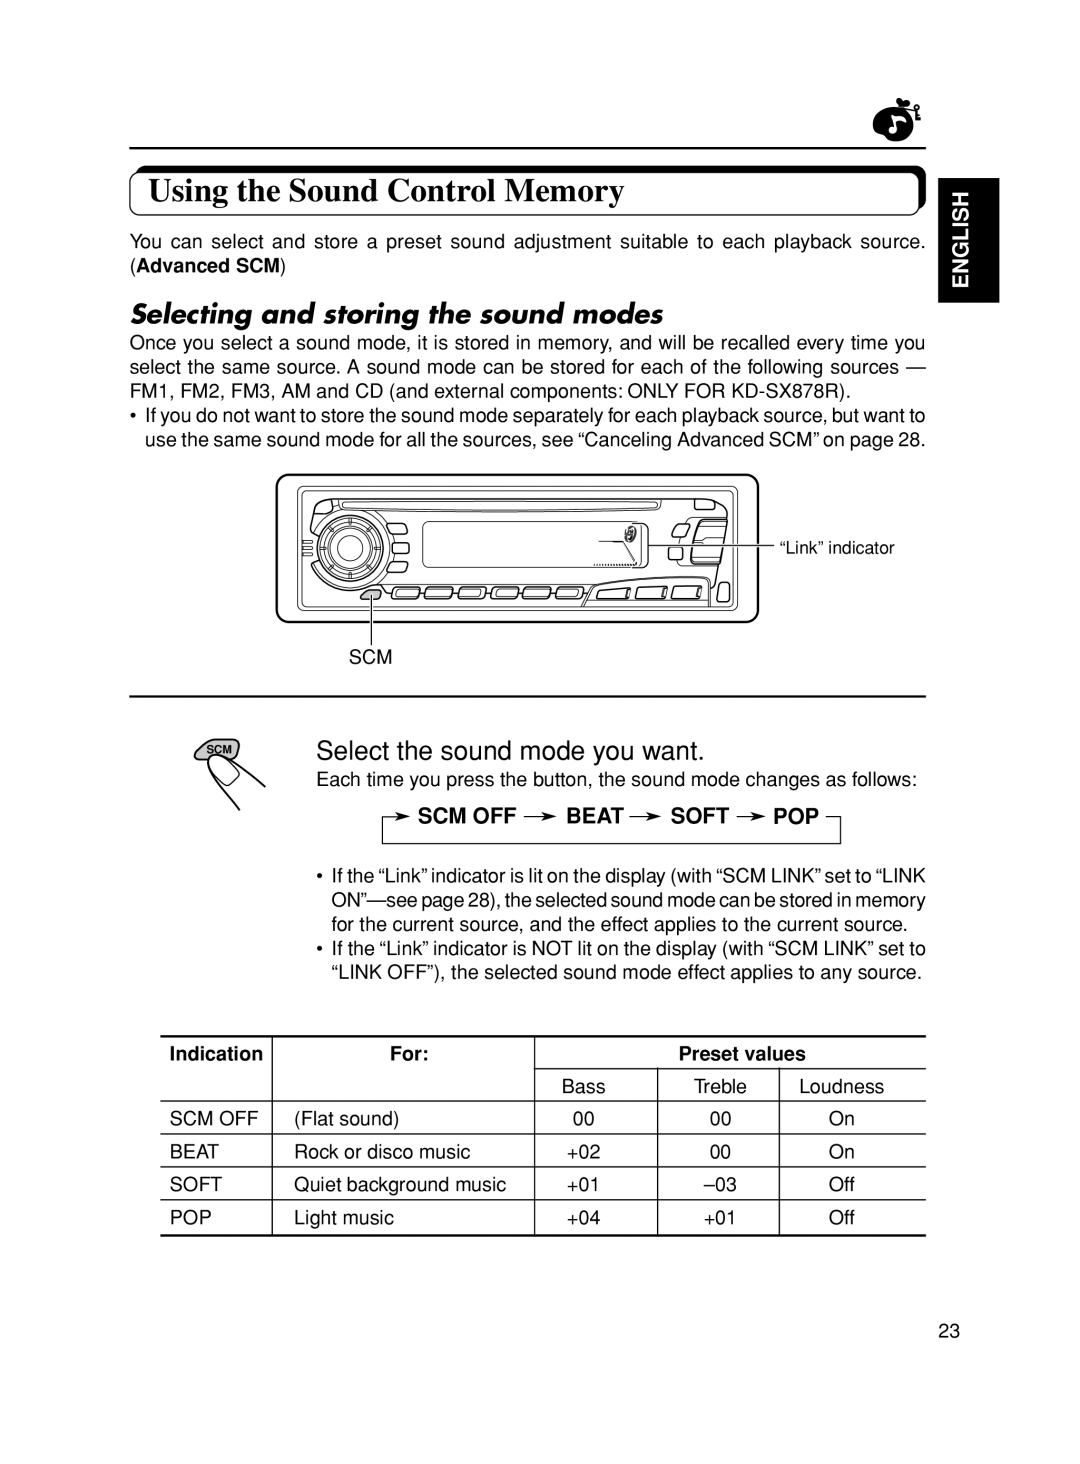 JVC KD-SX878R manual Using the Sound Control Memory, Selecting and storing the sound modes, English, Scm Off Beat Soft Pop 